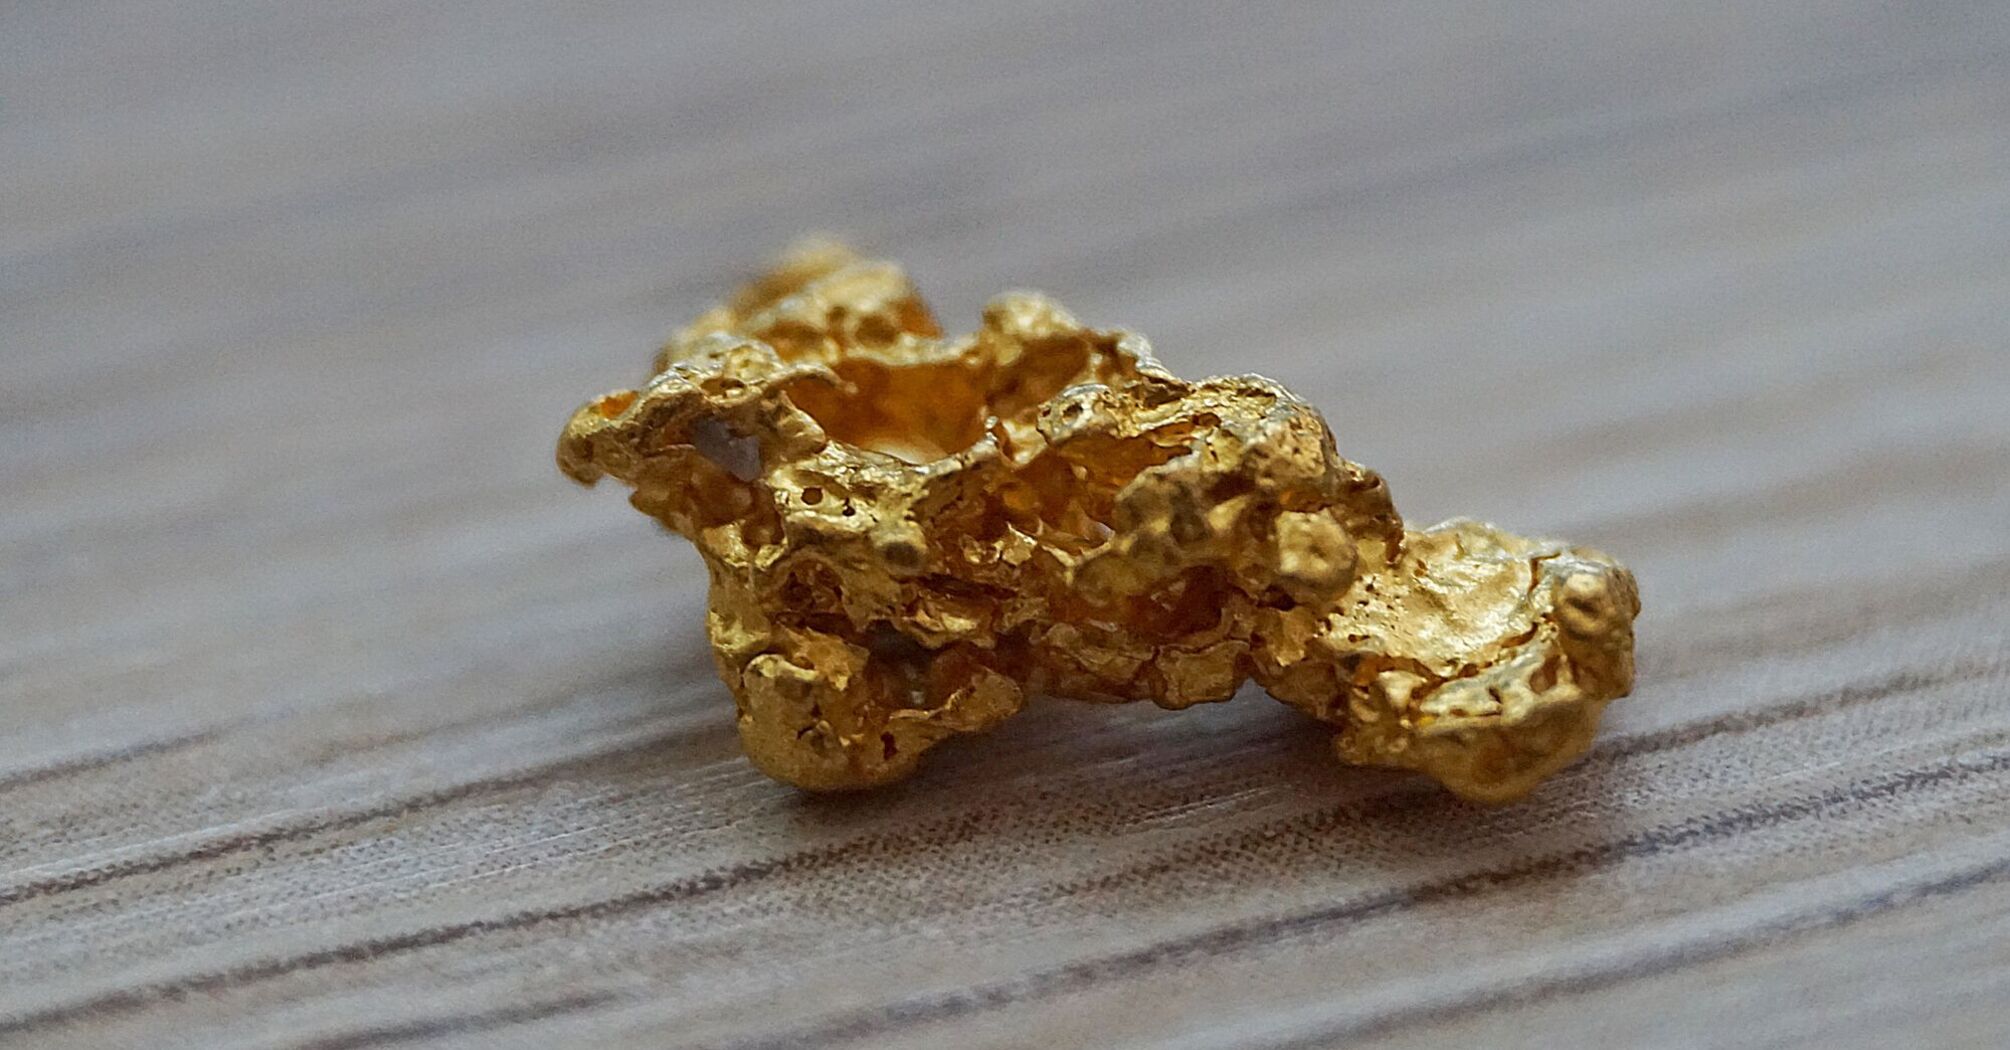 The largest gold nugget in the country's history found in the UK